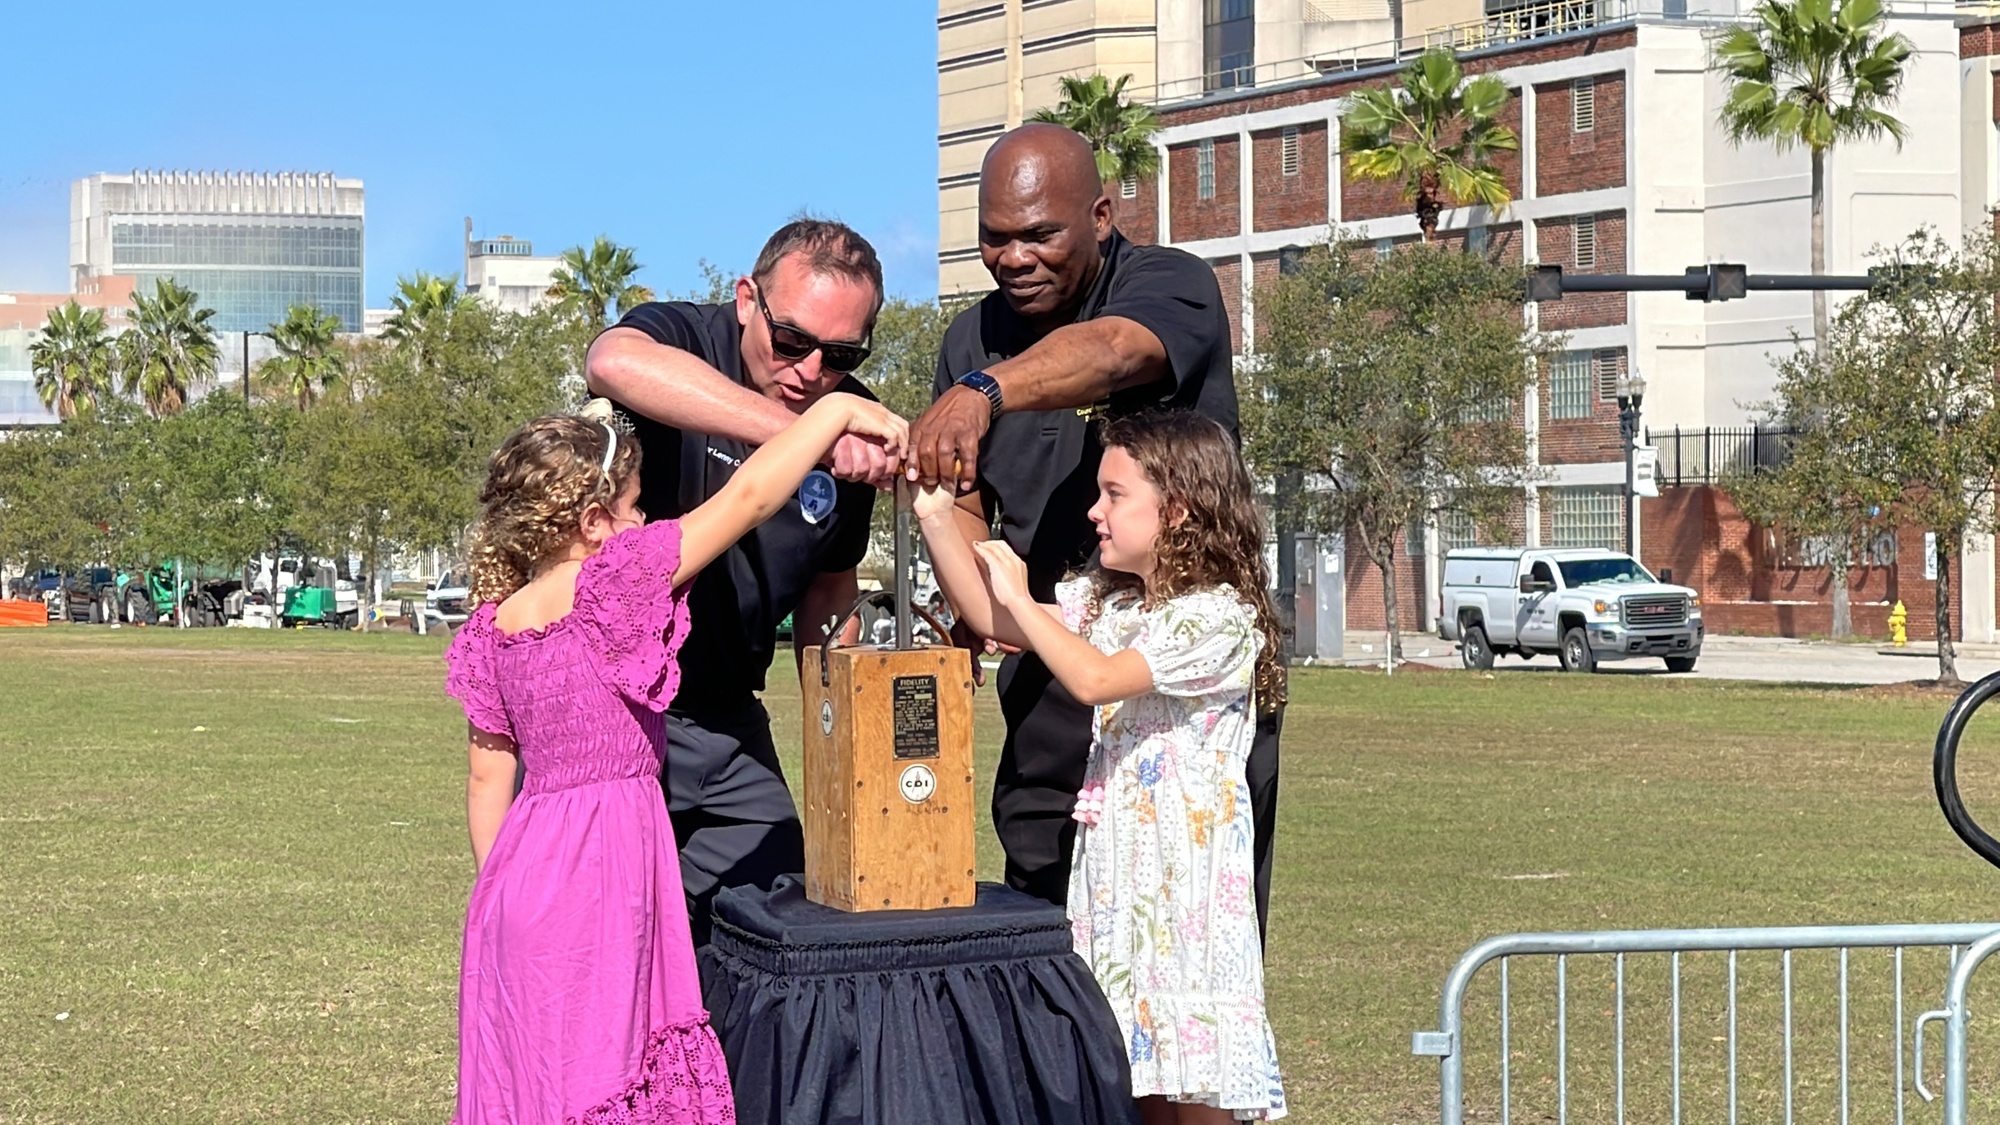 Jacksonville Mayor Lenny Curry, Council member Reggie Gaffney and the daughters of demolition company owner Steve Pece, 7-year-old Haven and 6-year old Blythe, pushed the ceremonial plunger to signal the implosion.